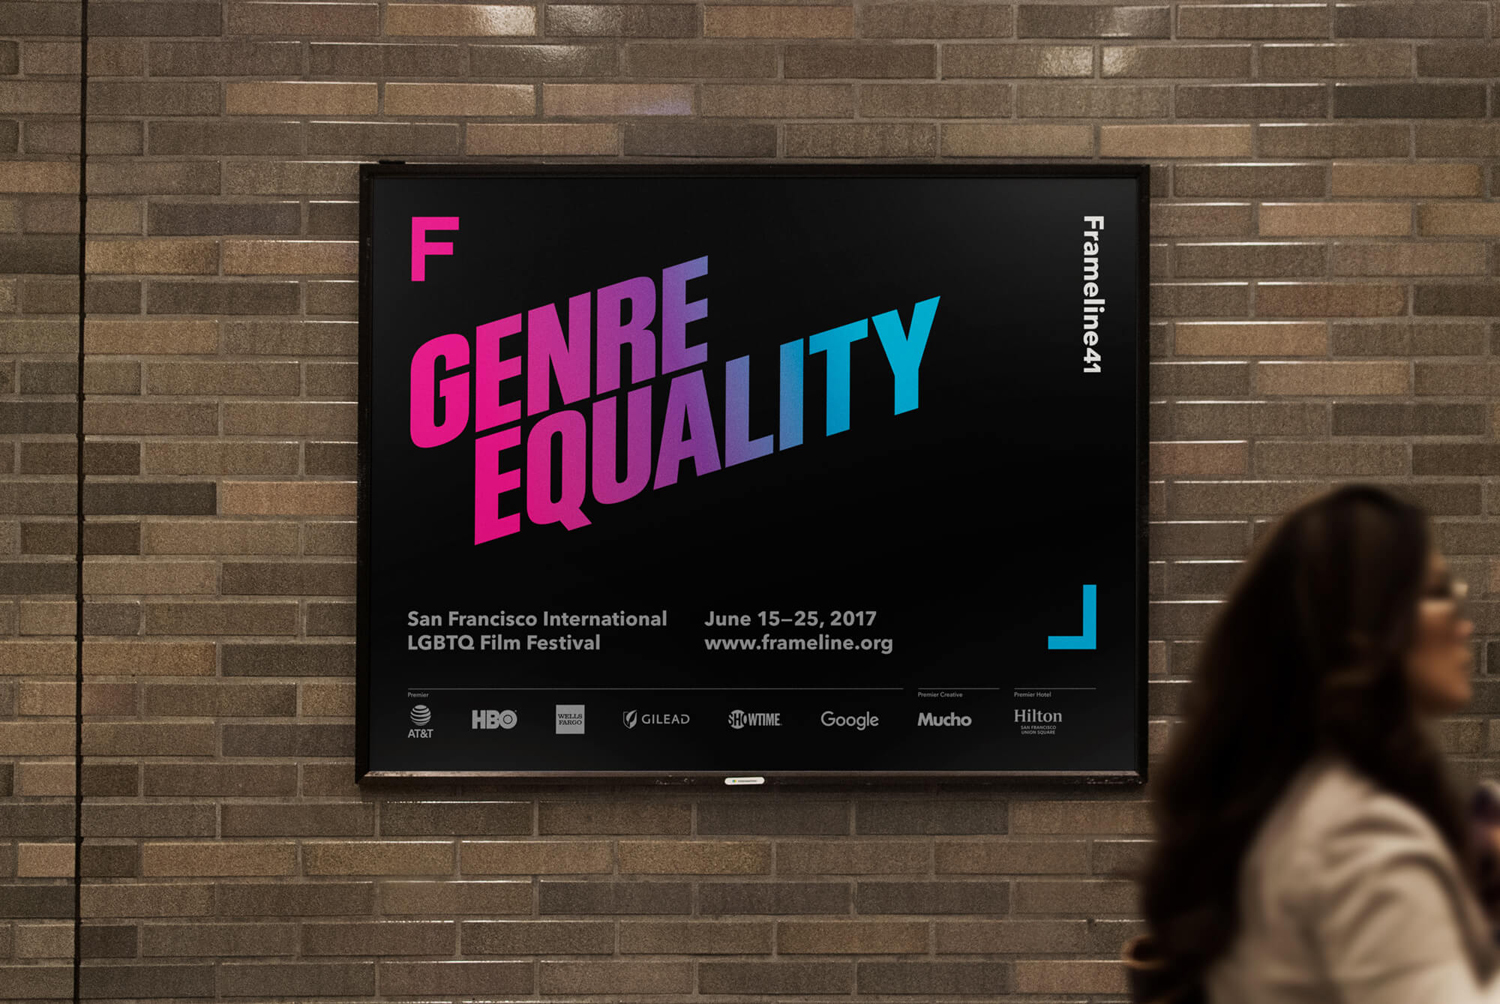 Visual identity and poster by Mucho for San Francisco based LGBT film festival Frameline 41.